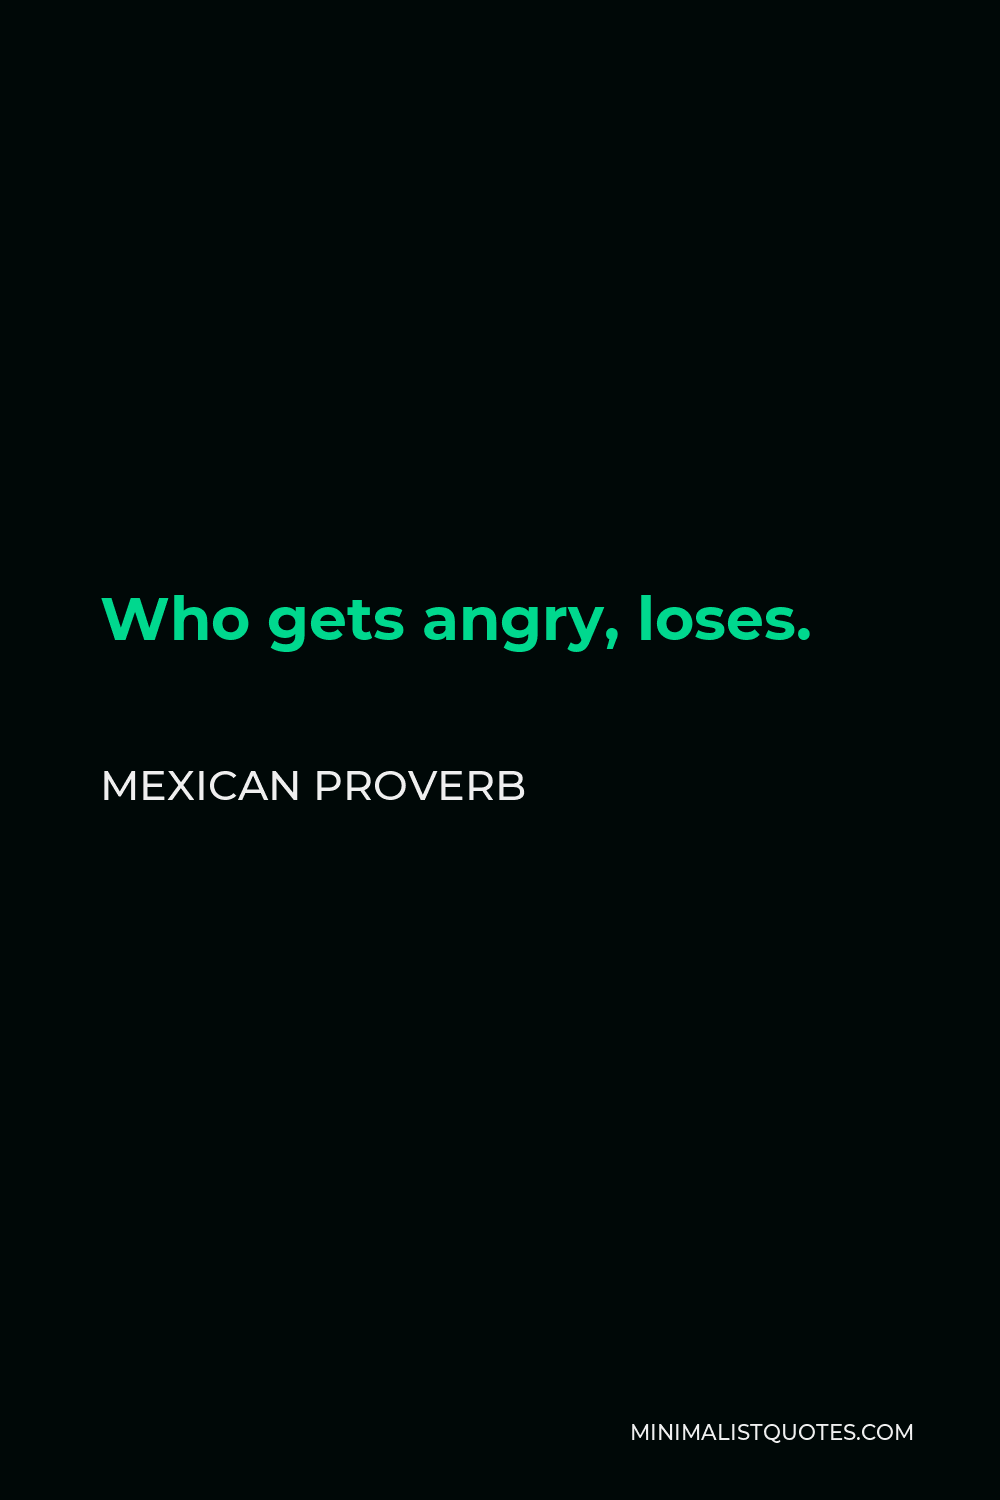 Mexican Proverb Quote - Who gets angry, loses.